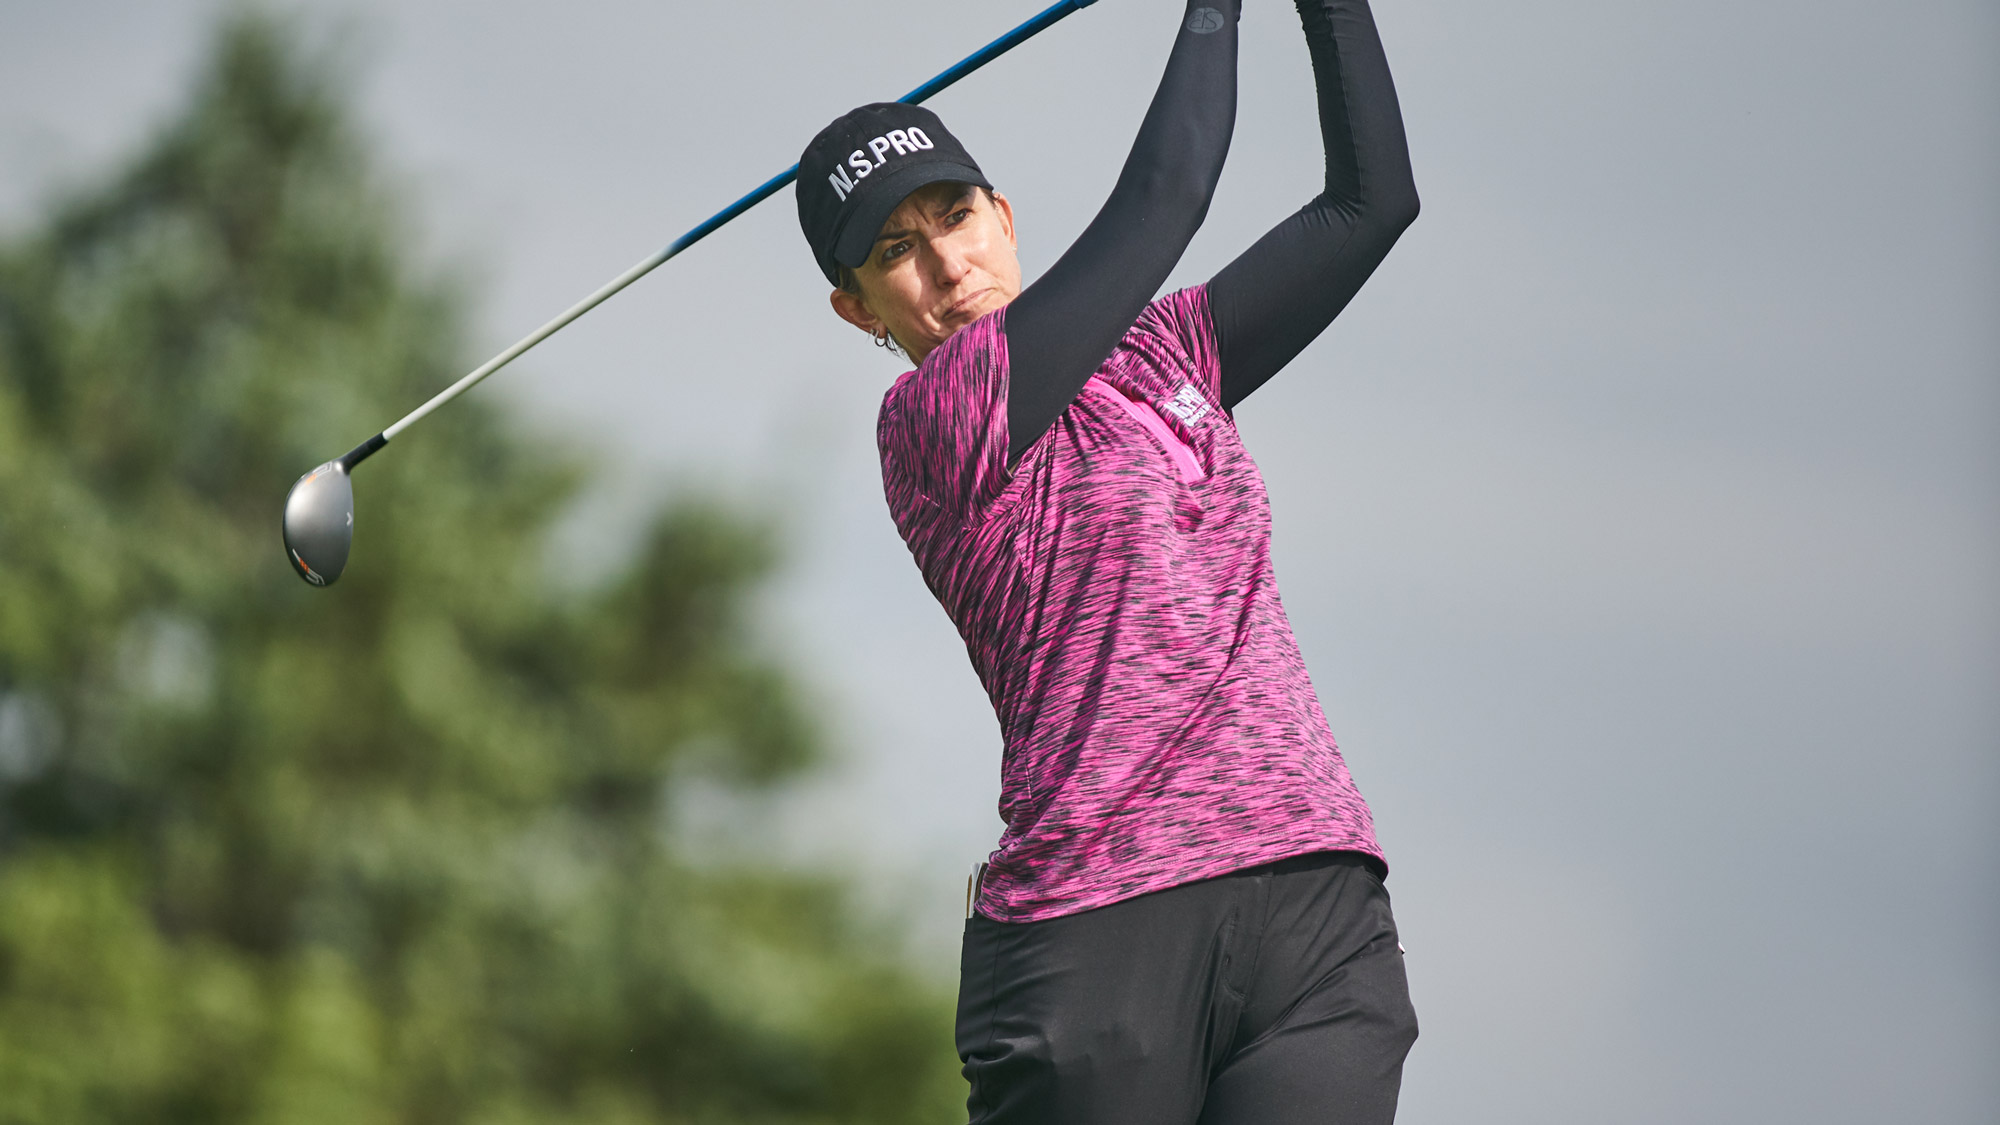 Karrie Webb is Making Her 2nd Start of the Year in Texas